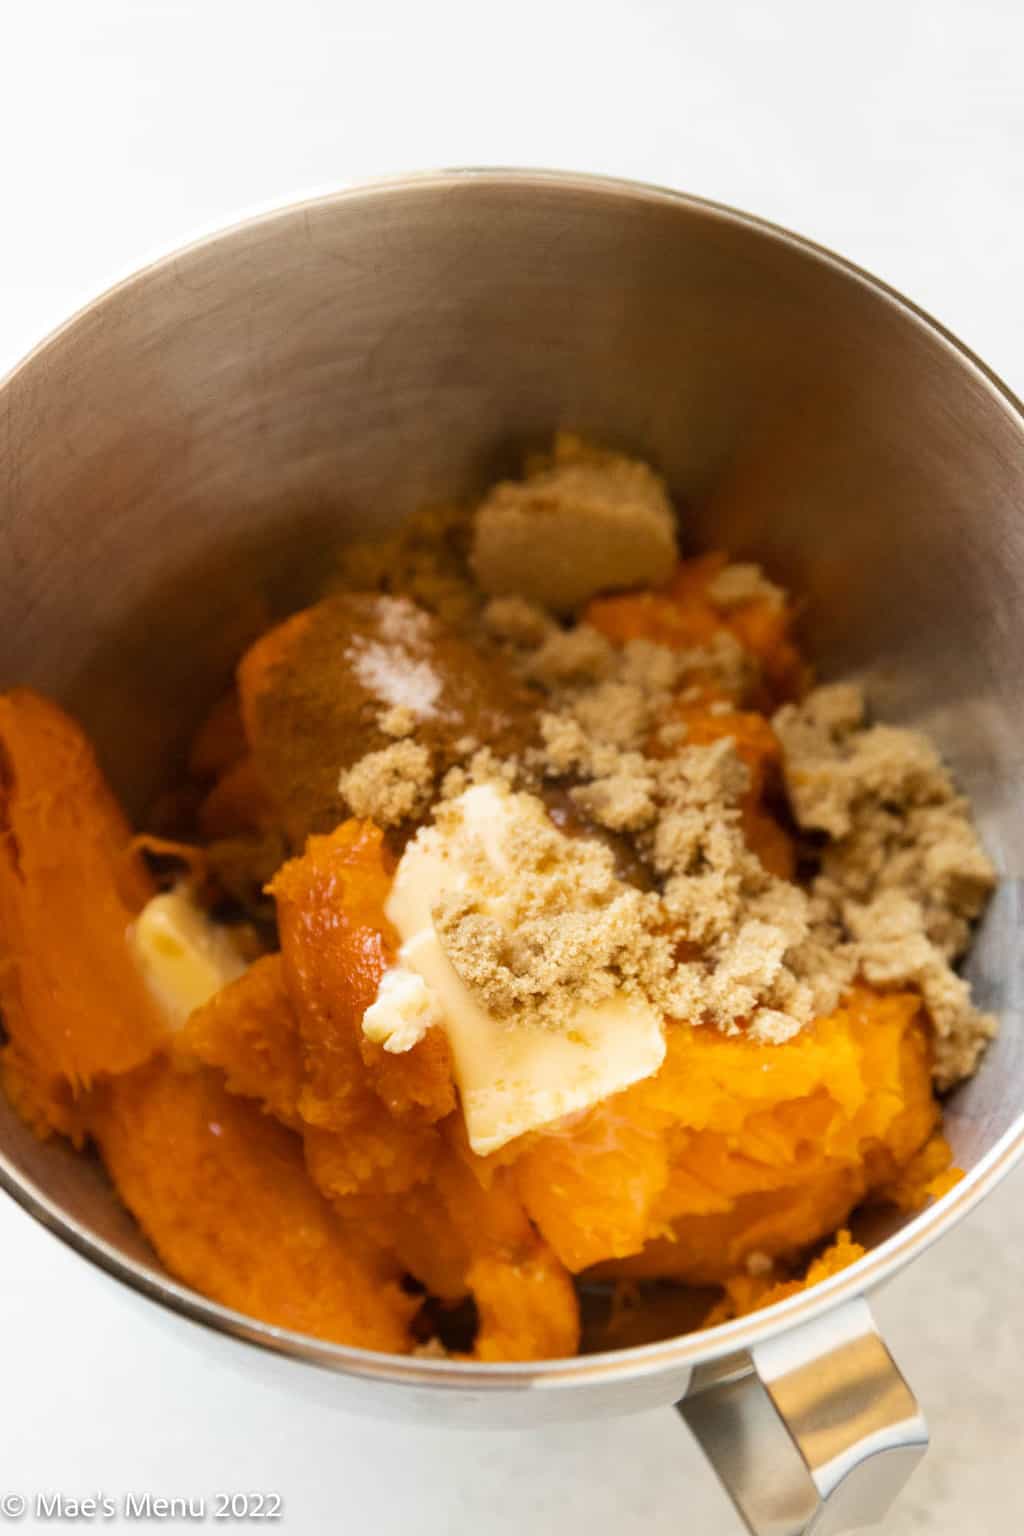 Sweet potato pulp in a stand mixer with butter, brown sugar, cinnamon, and salt.